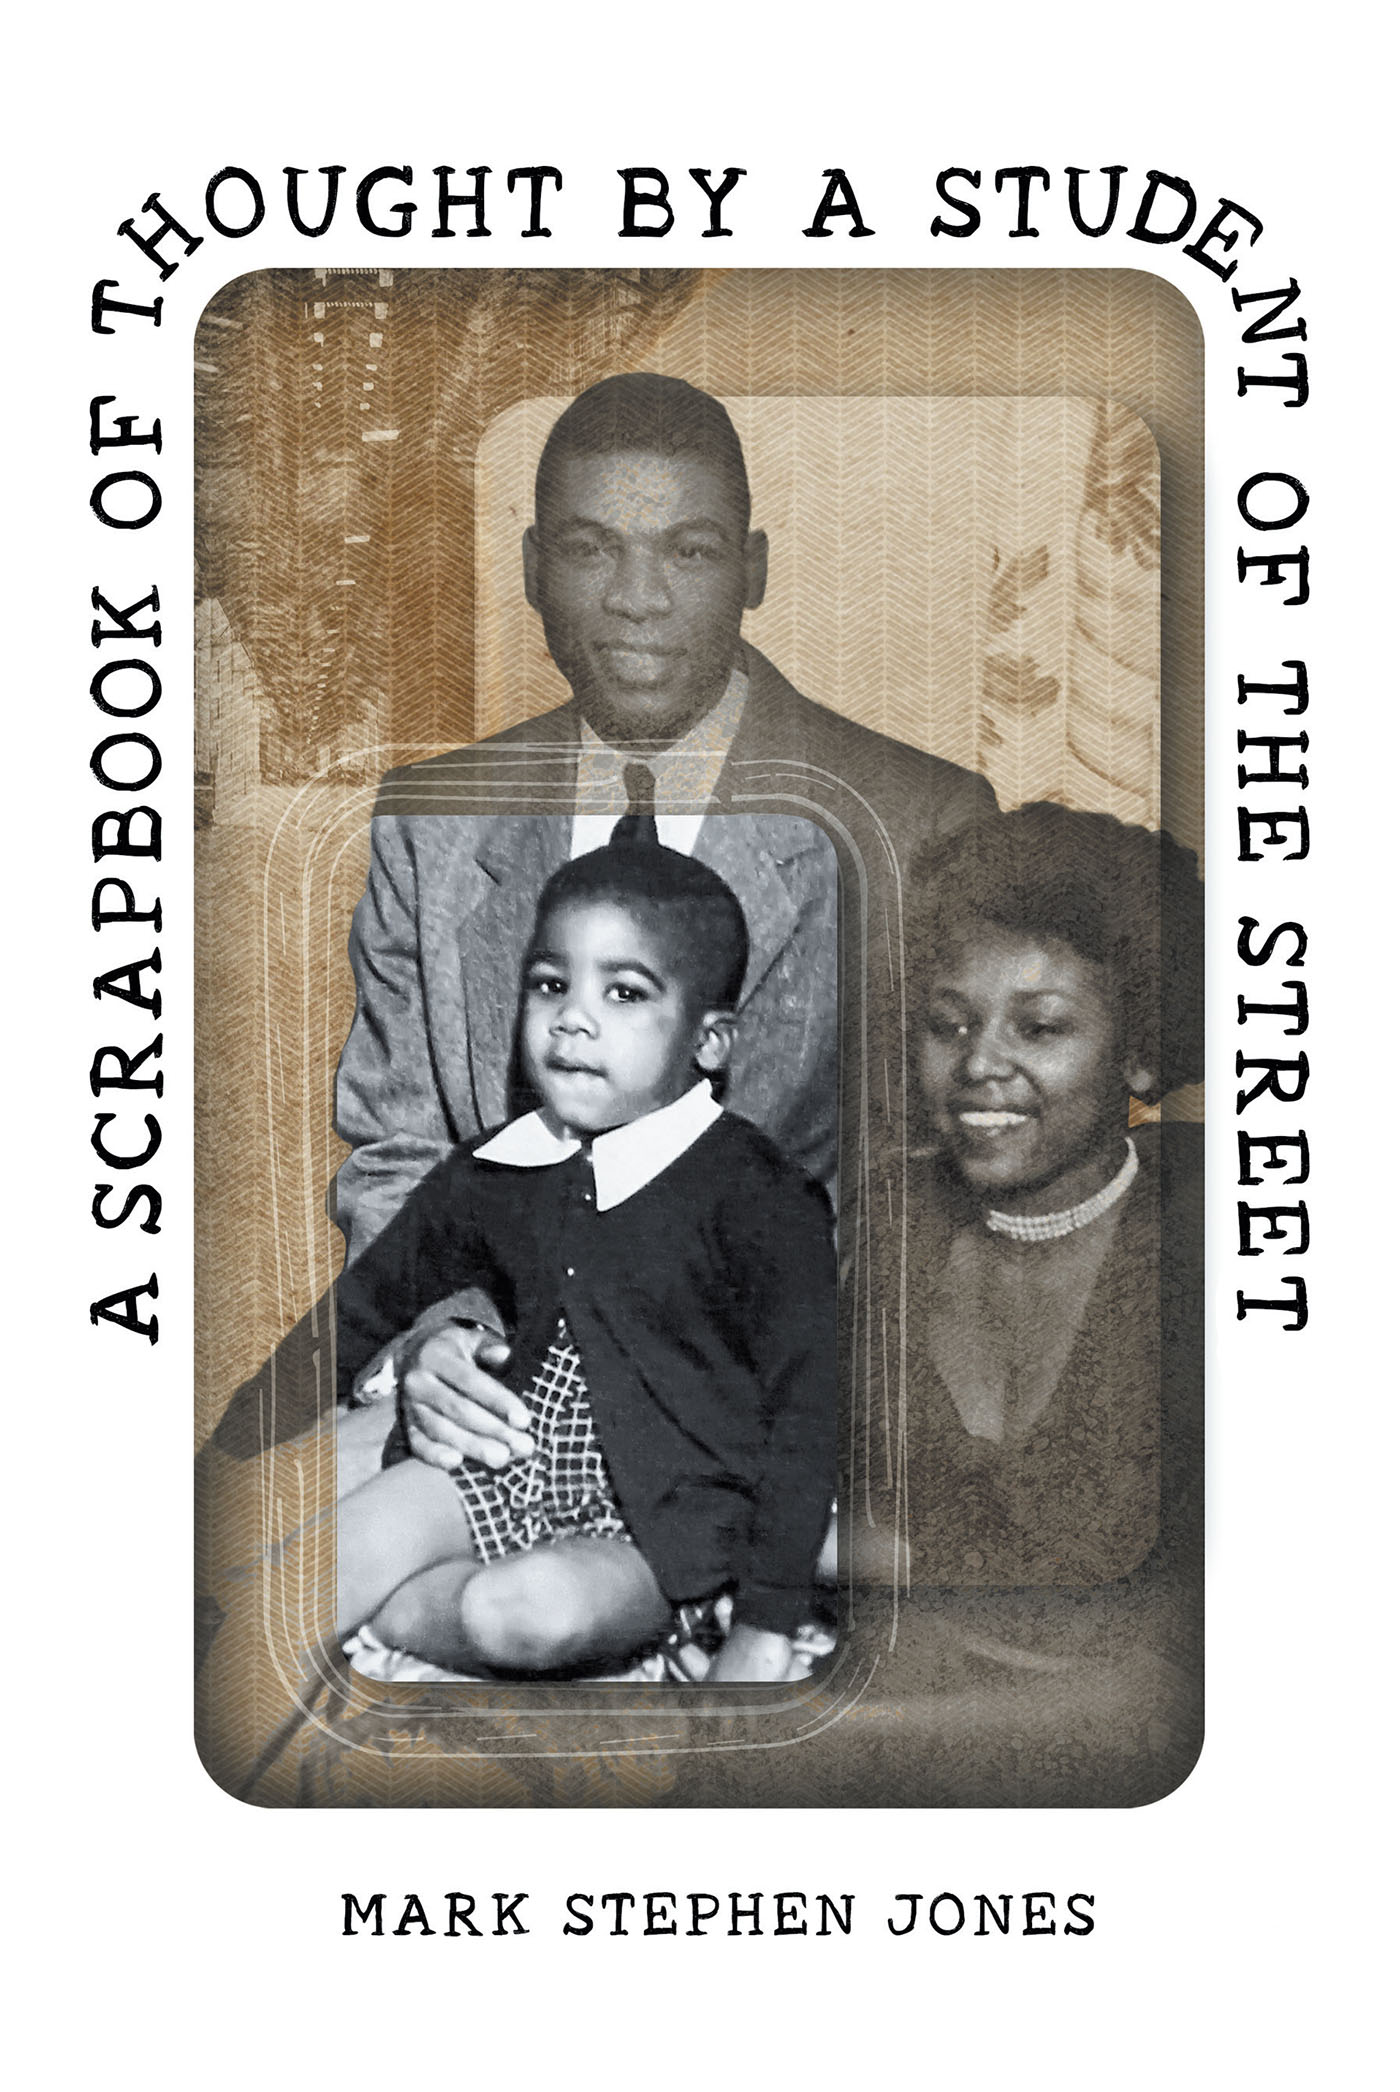 Author Mark Stephen Jones’s New Book, "A Scrapbook of Thought by a Student of the Street," is a Gripping Collection of Powerful Autobiographical Poetry